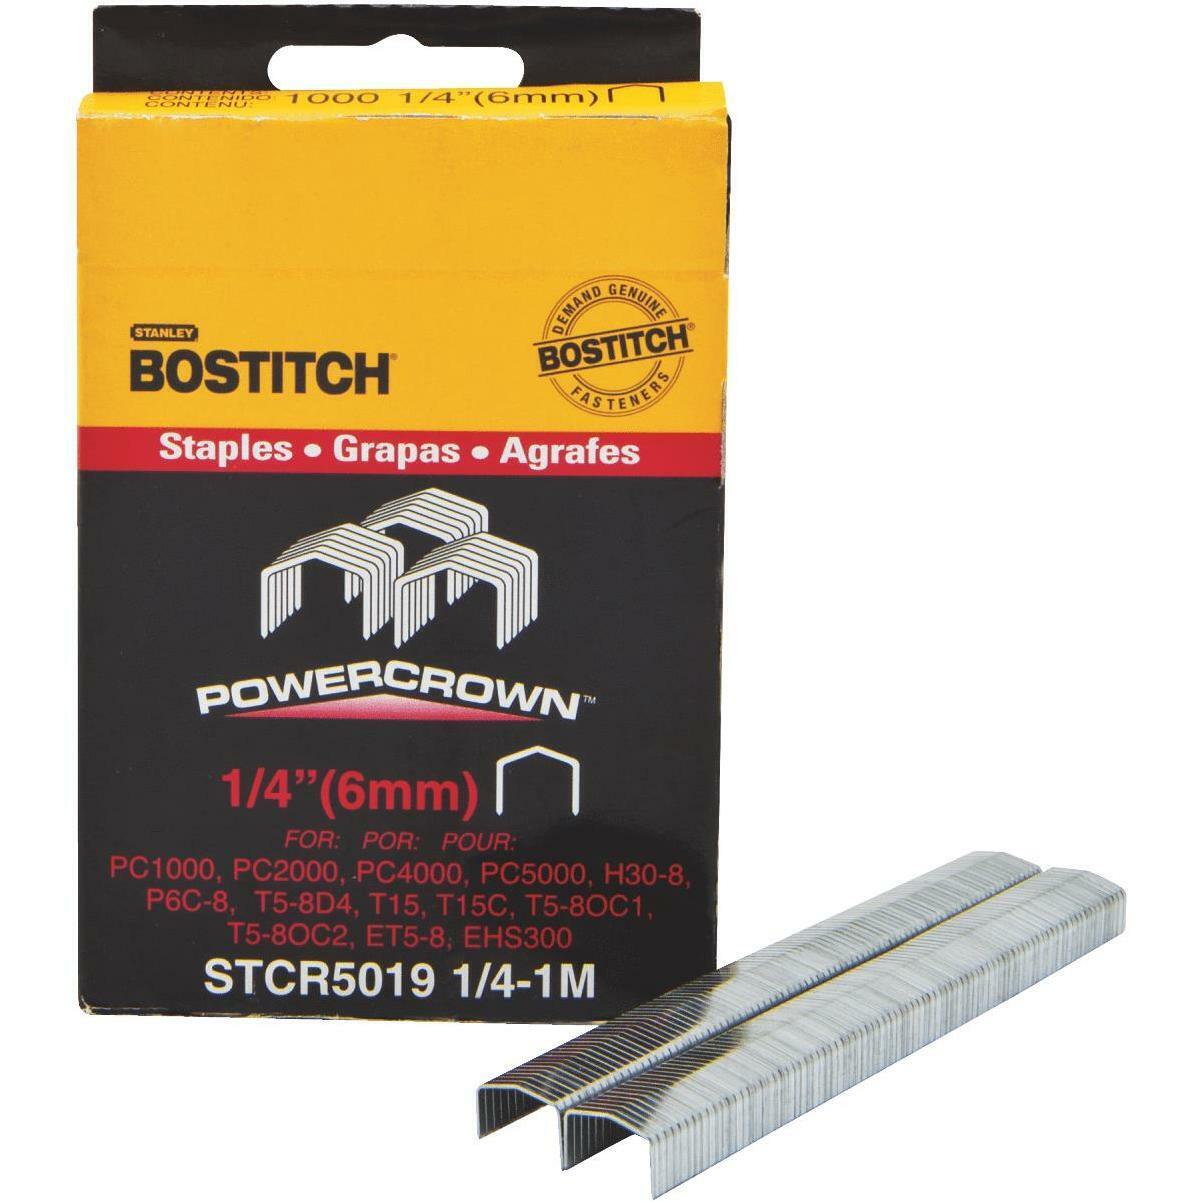 Bostitch Powercrown Tacker Staples 1/4'' (1000-pack) STCR5019 1/4-1M